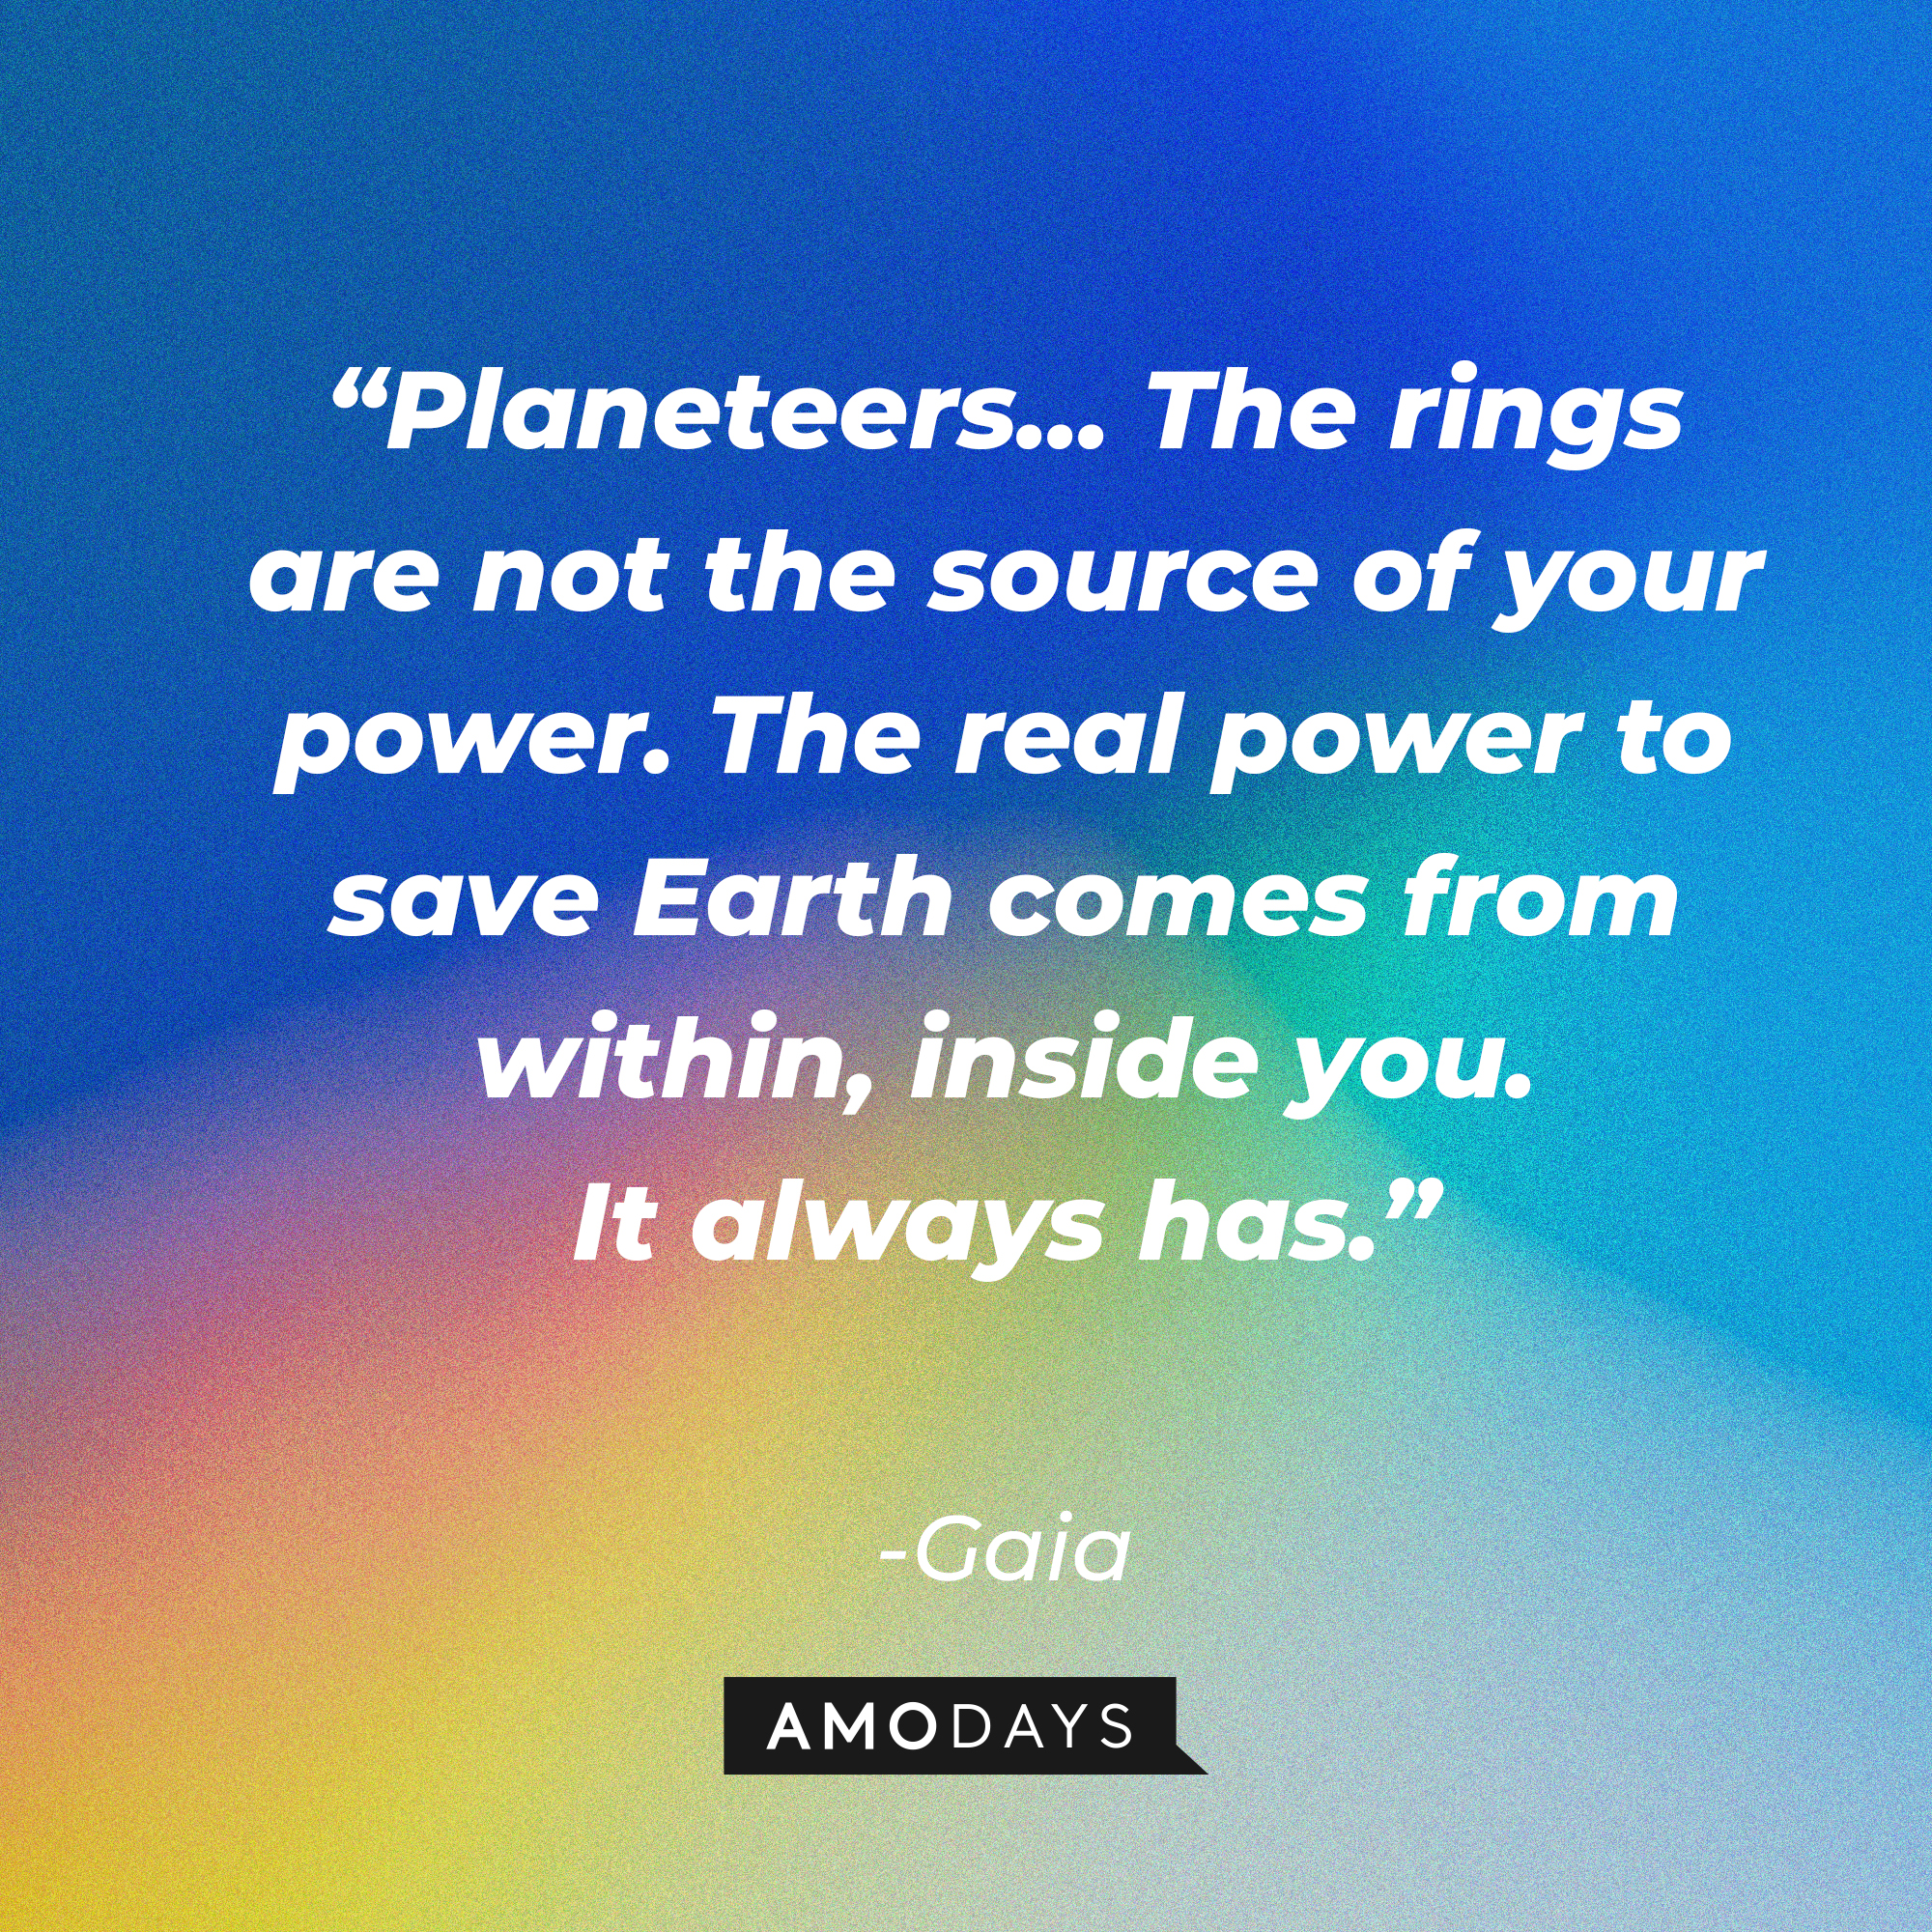 Gaia's quote: “Planeteers... The rings are not the source of your power. The real power to save Earth comes from within, inside you. It always has.” | Source: Amodays